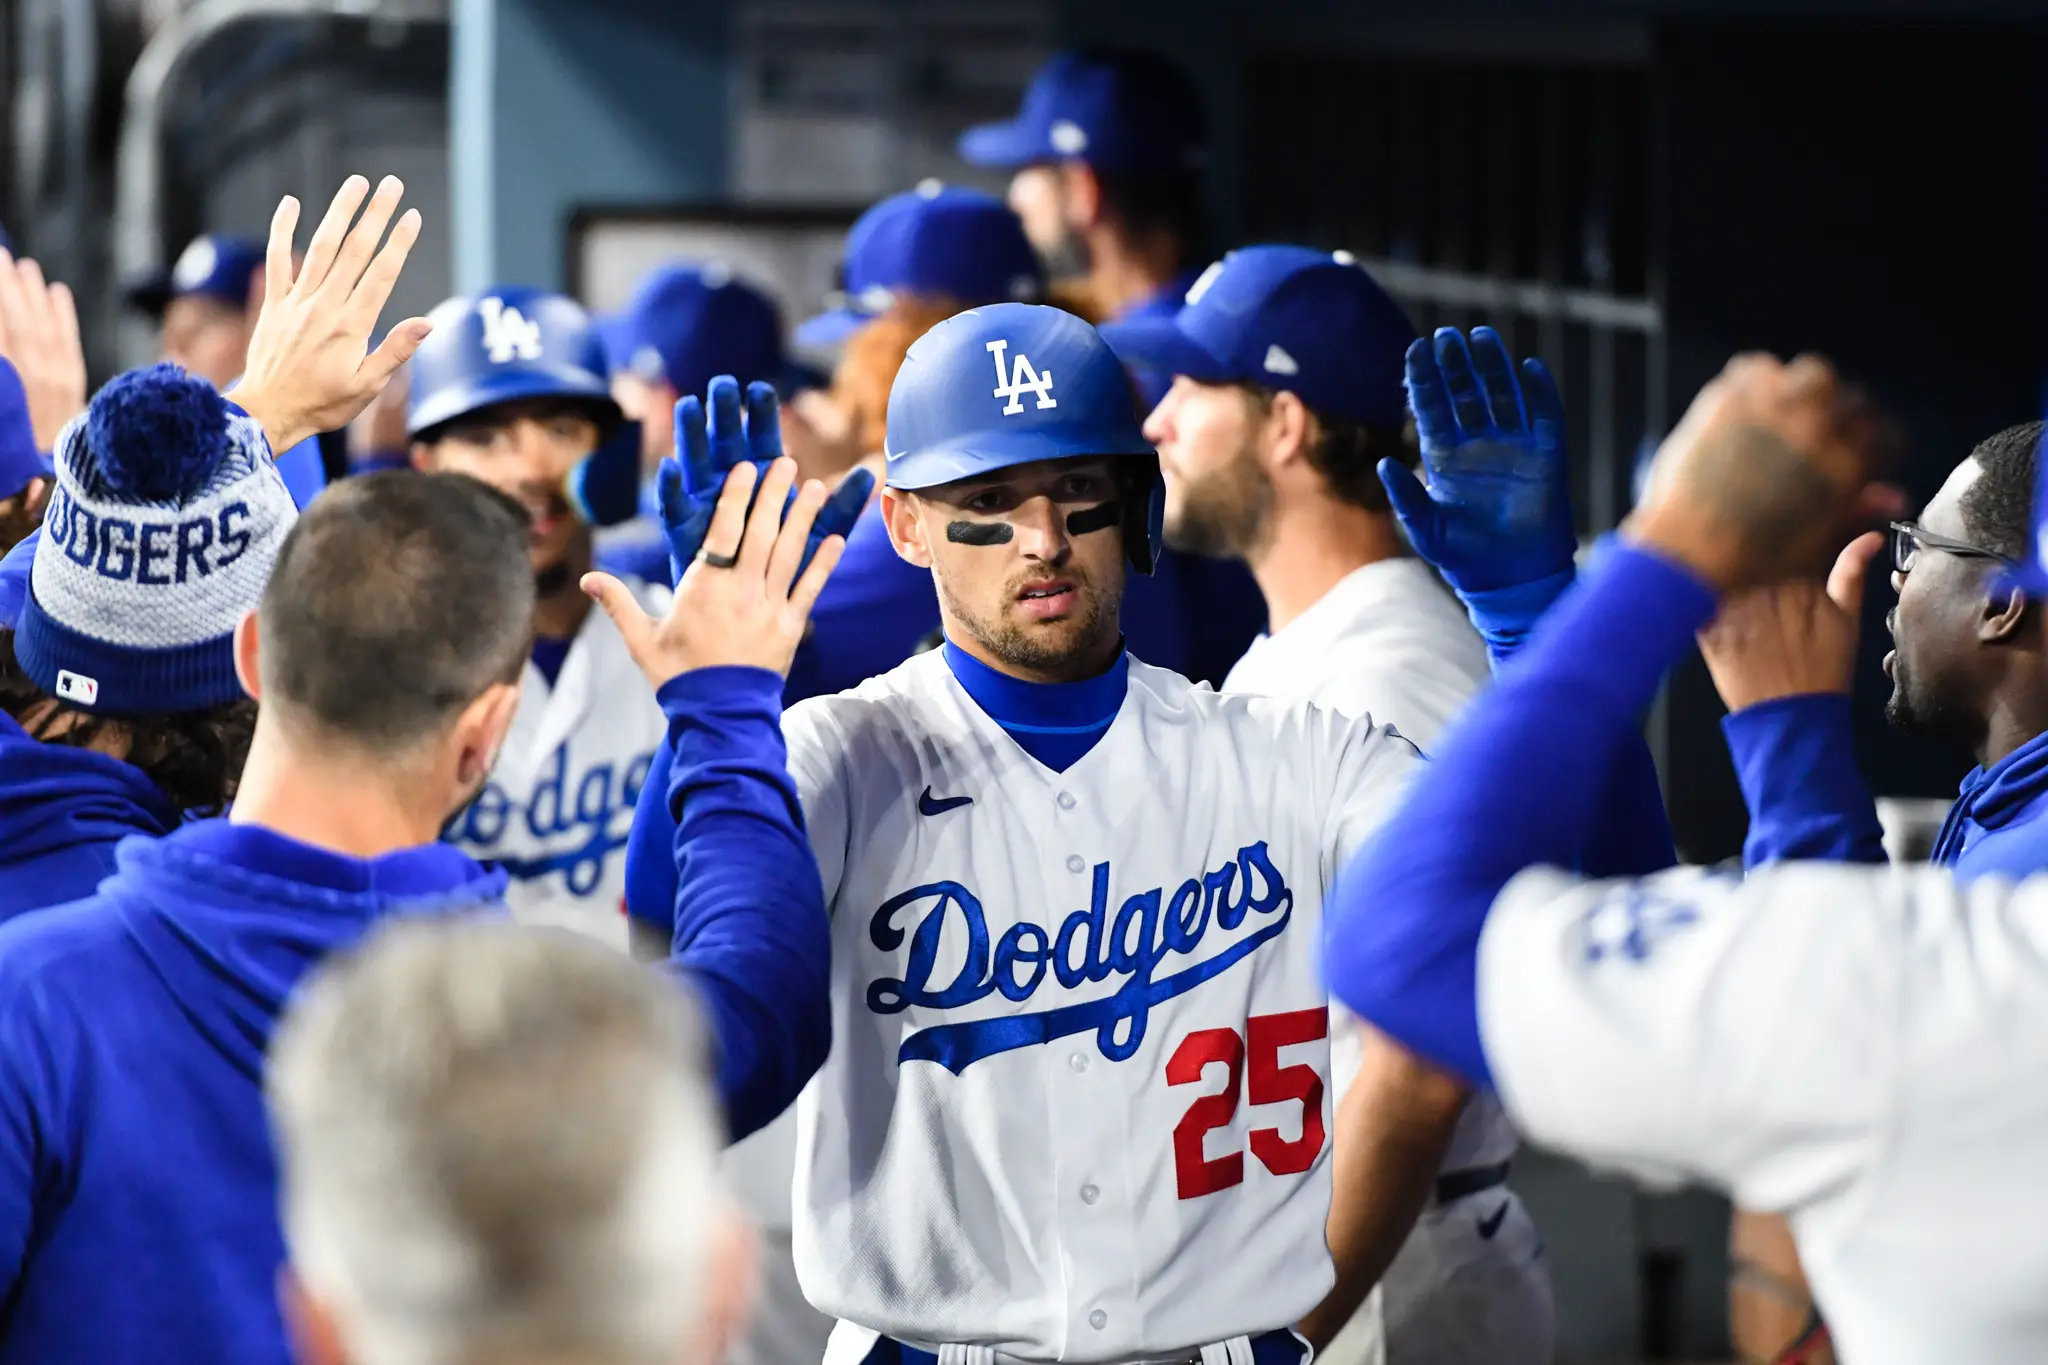 Dodgers Notes: Trayce Thompson for 3, Rojas’ Thoughts on Pitch Clock, JD Martinez’s Swing Mechanics ..